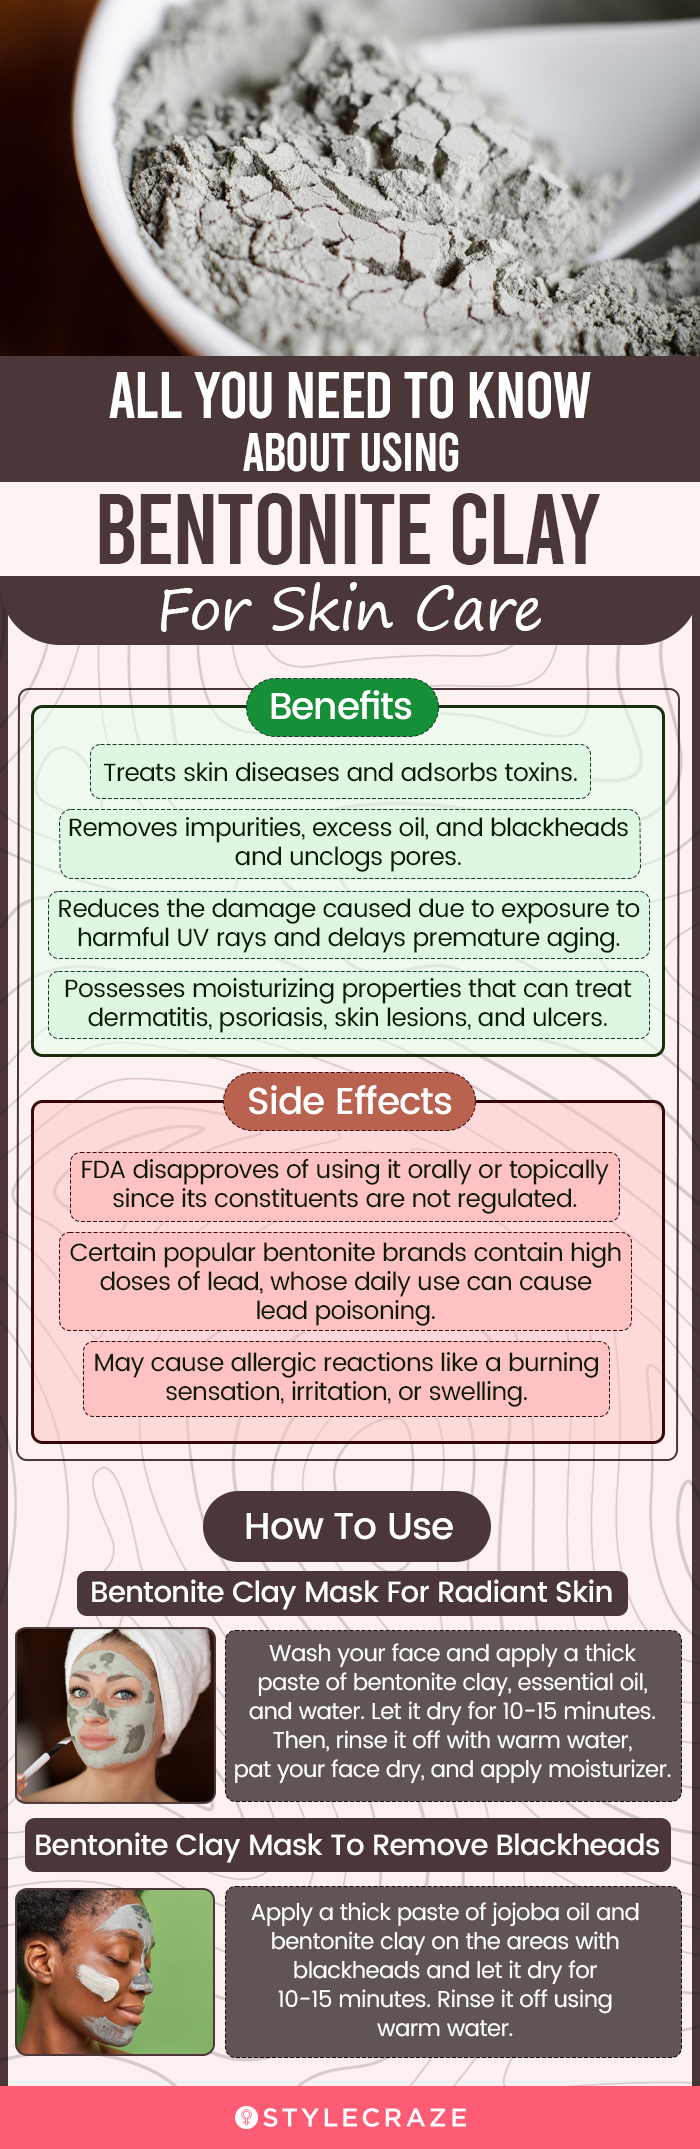 all you need to know about using bentonite clay for skin care (infographic) 